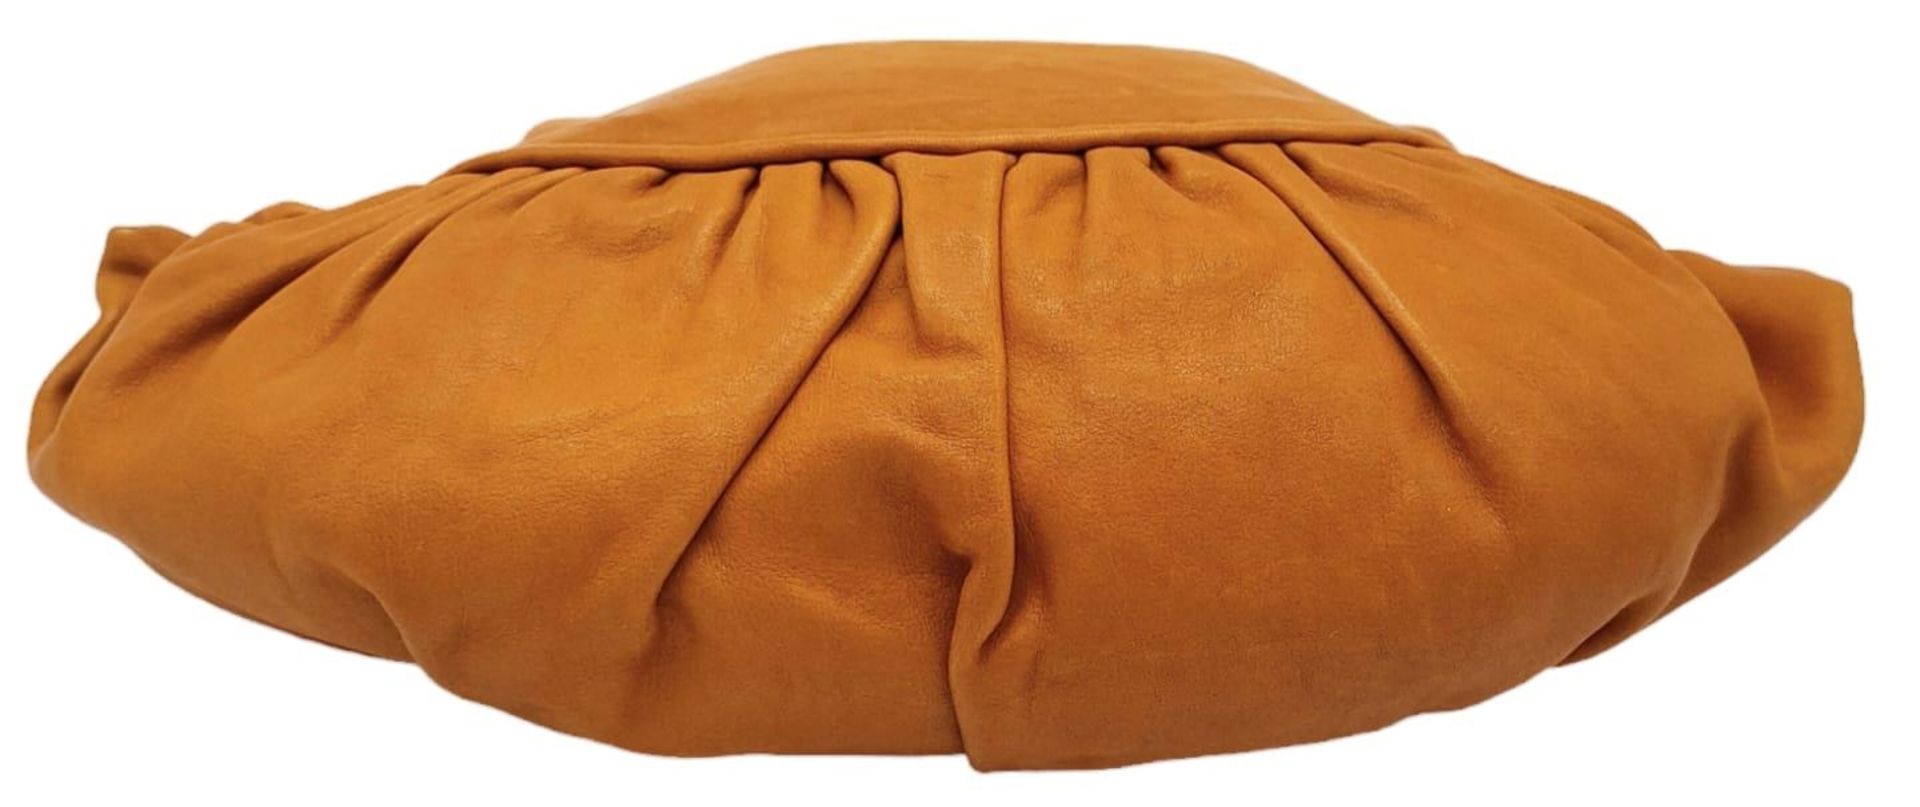 A Christian Dior Caramel Ruffled Clutch Bag. Leather exterior with gold-toned hardware and a - Image 5 of 9